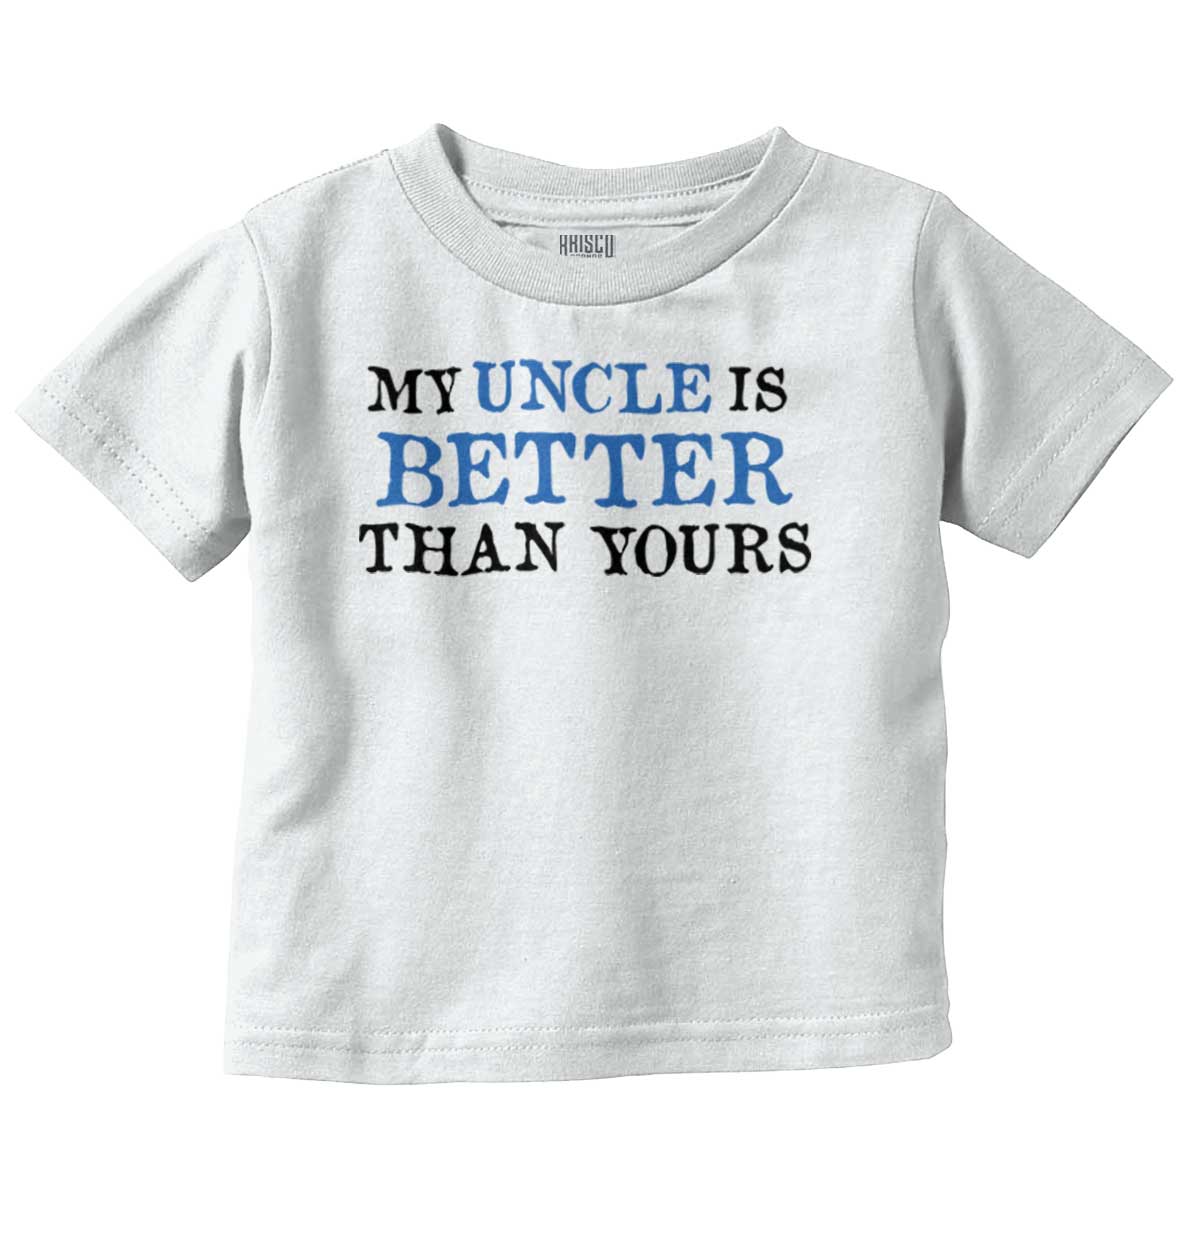 My Uncle Is Better Than Yours Infant Toddler T Shirt | Brisco Baby